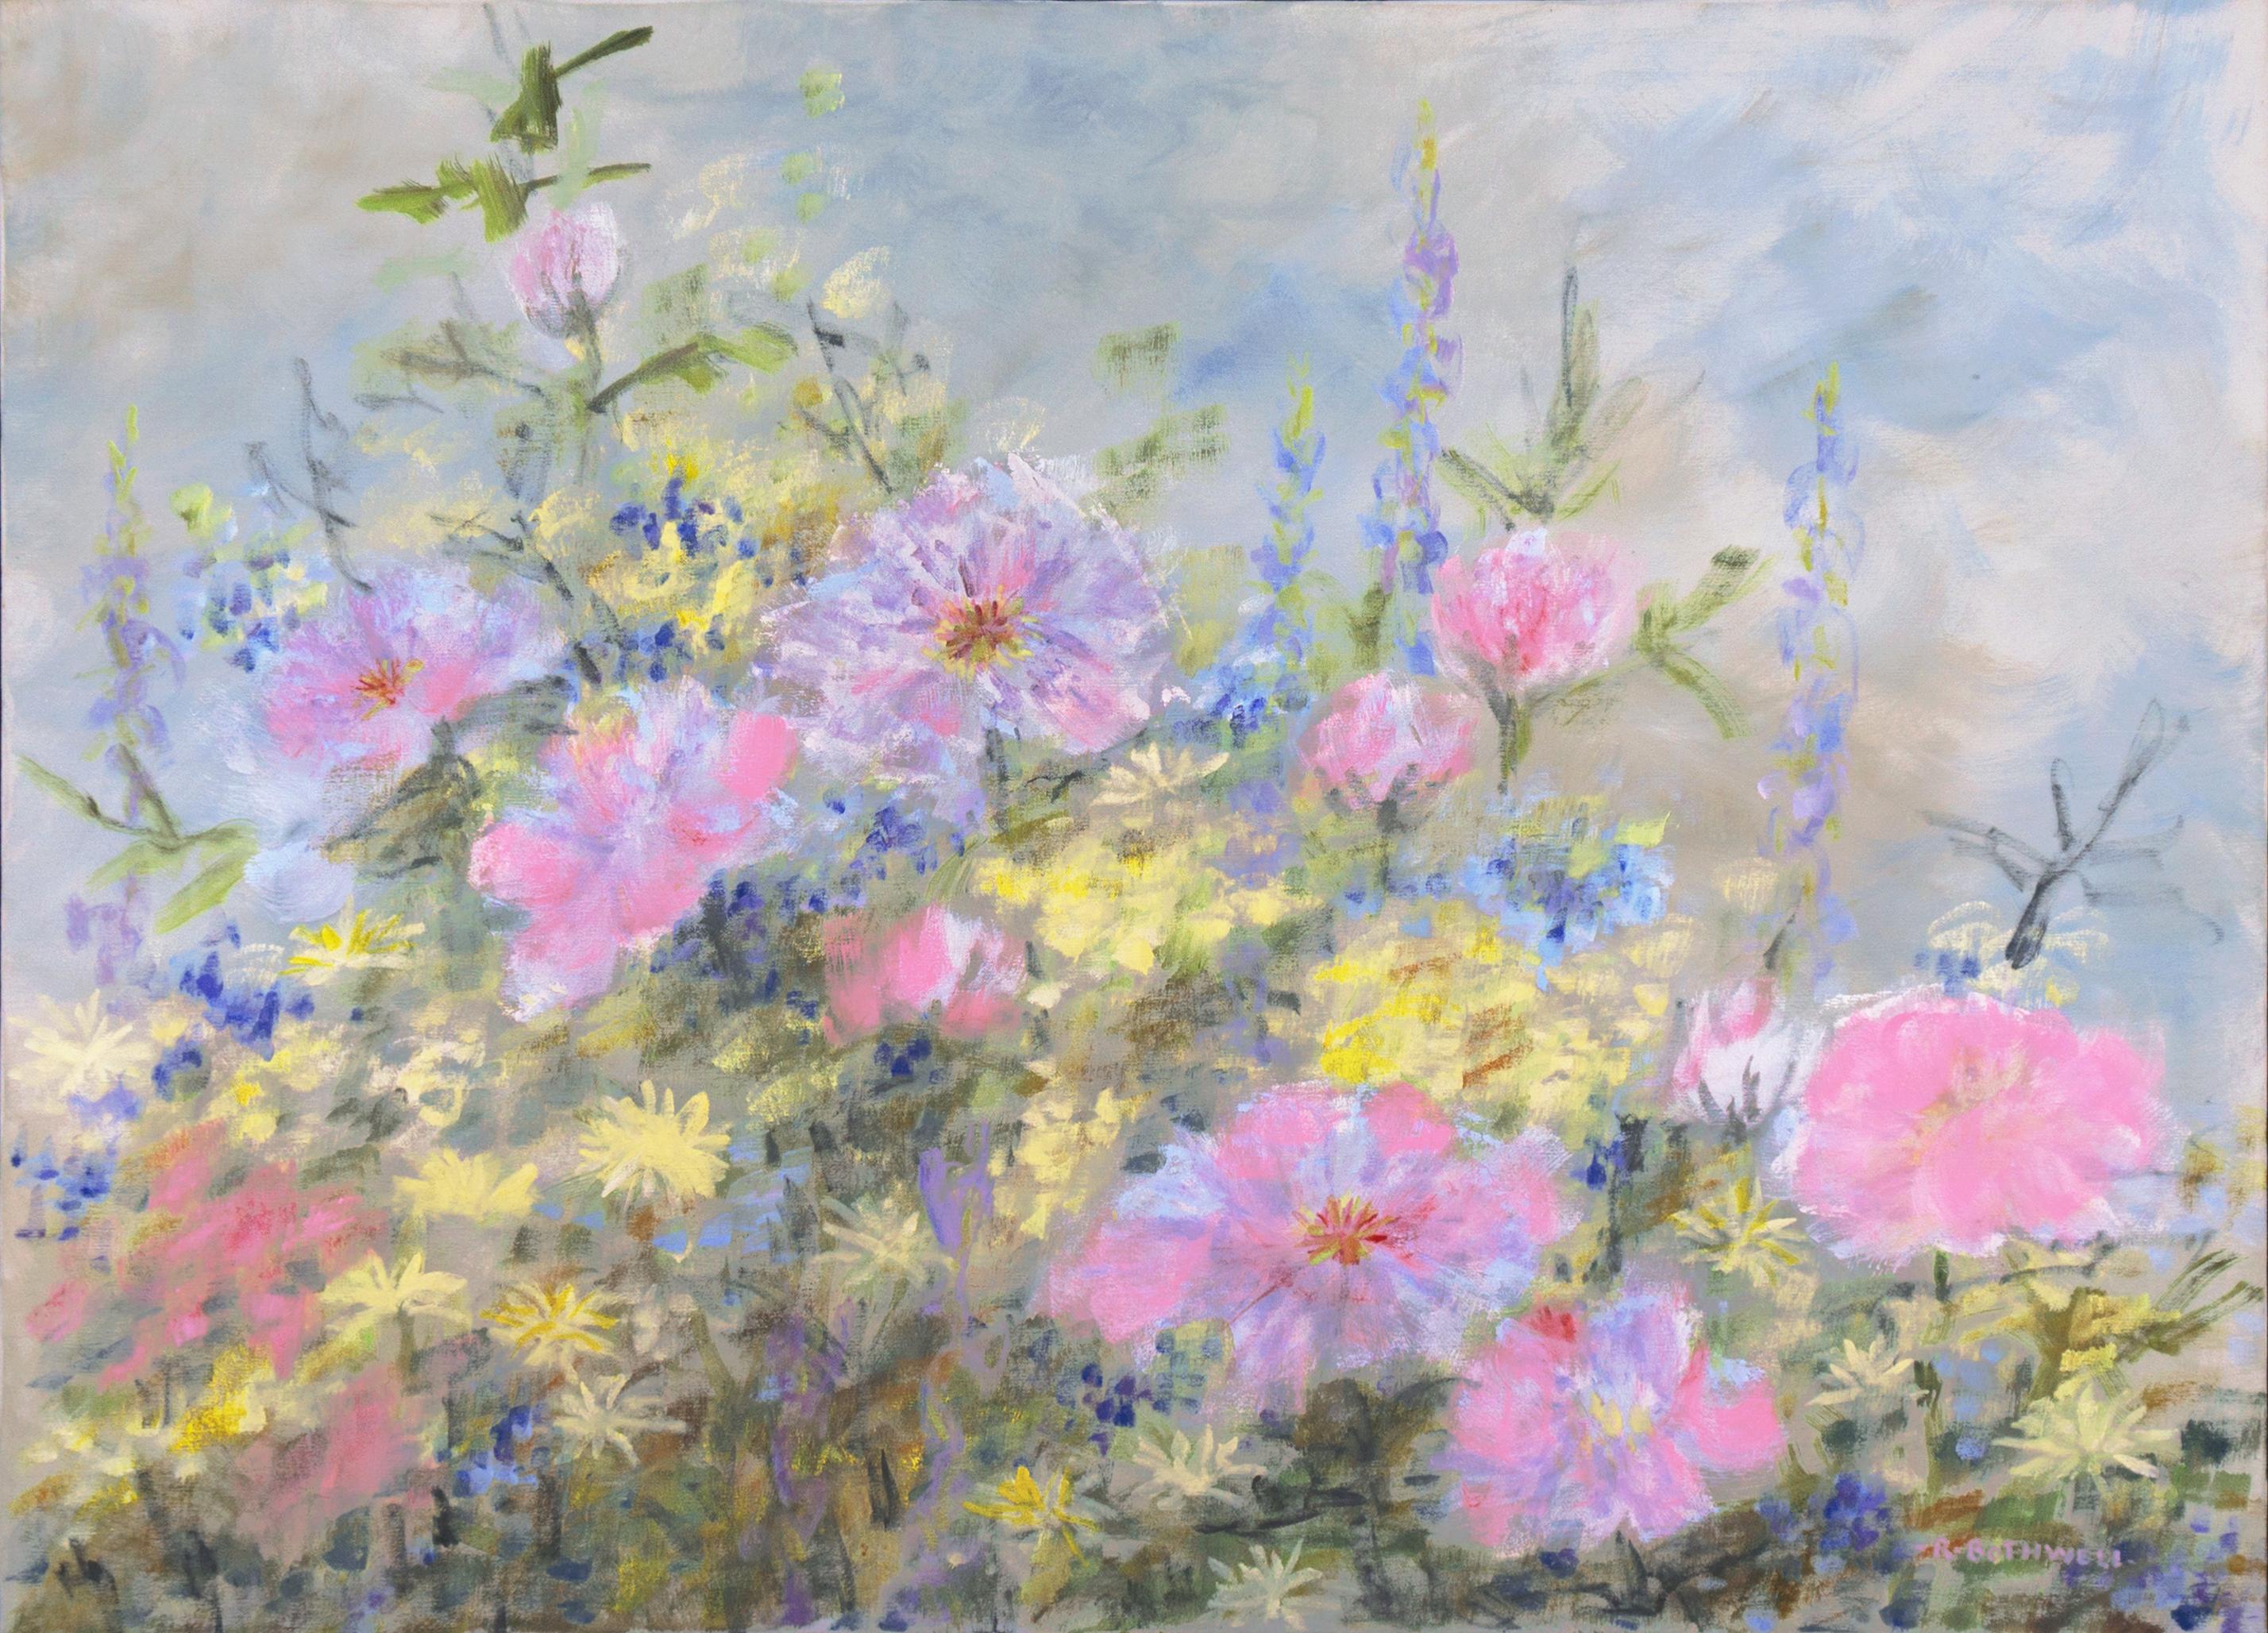 'Summer's Day, Wildflowers in the Breeze', American Impressionist Landscape  Oil